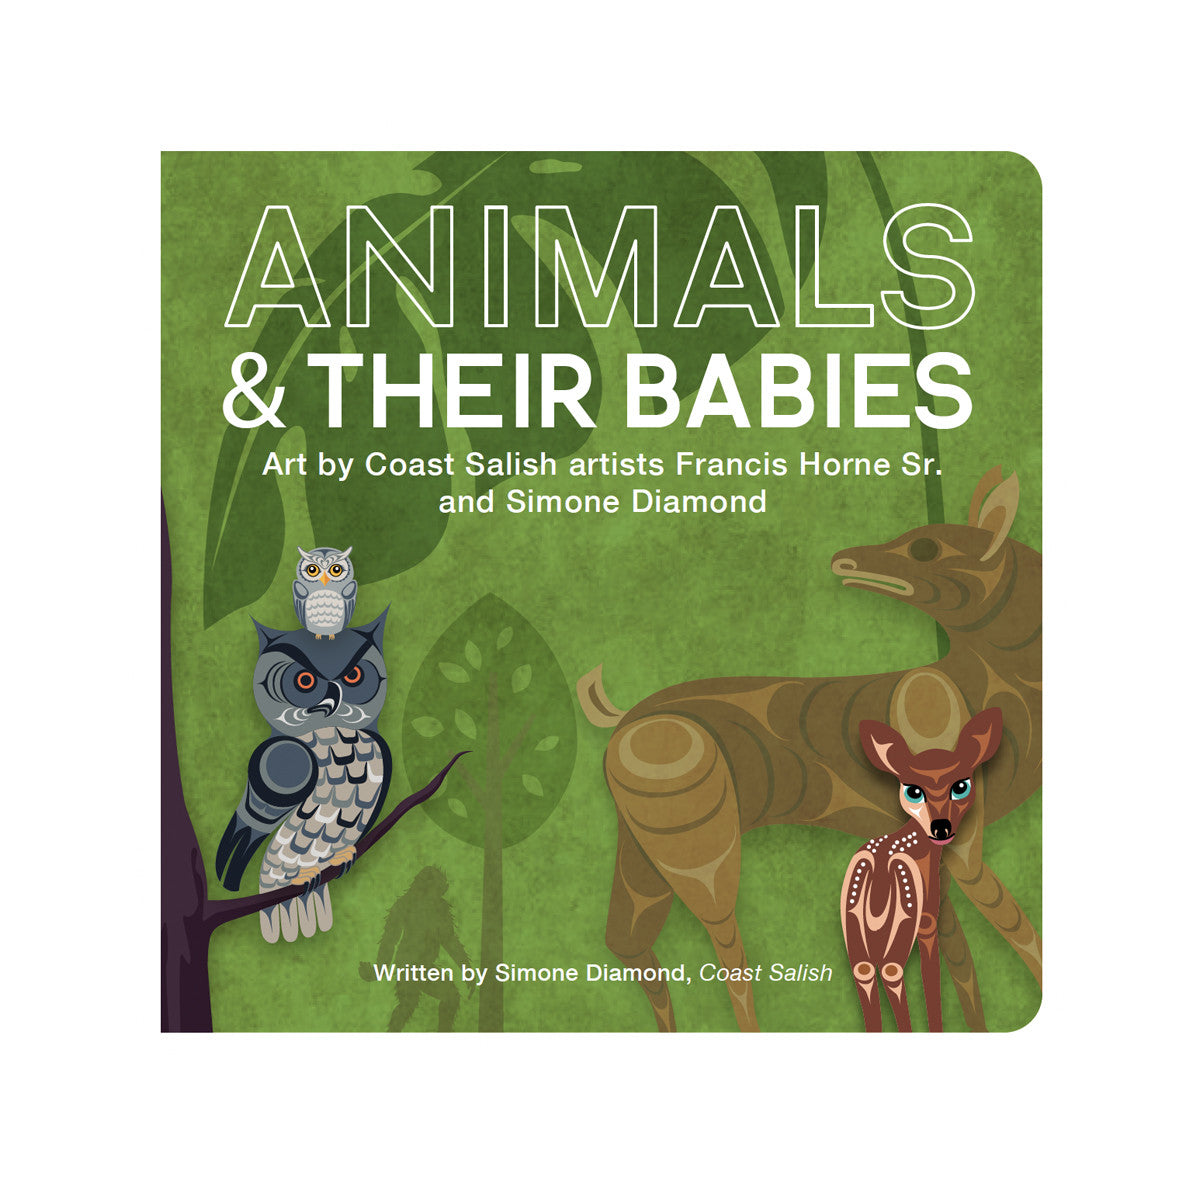 Board Book - Animals & Their Babies by Francis Horne Sr. and Simone Diamond